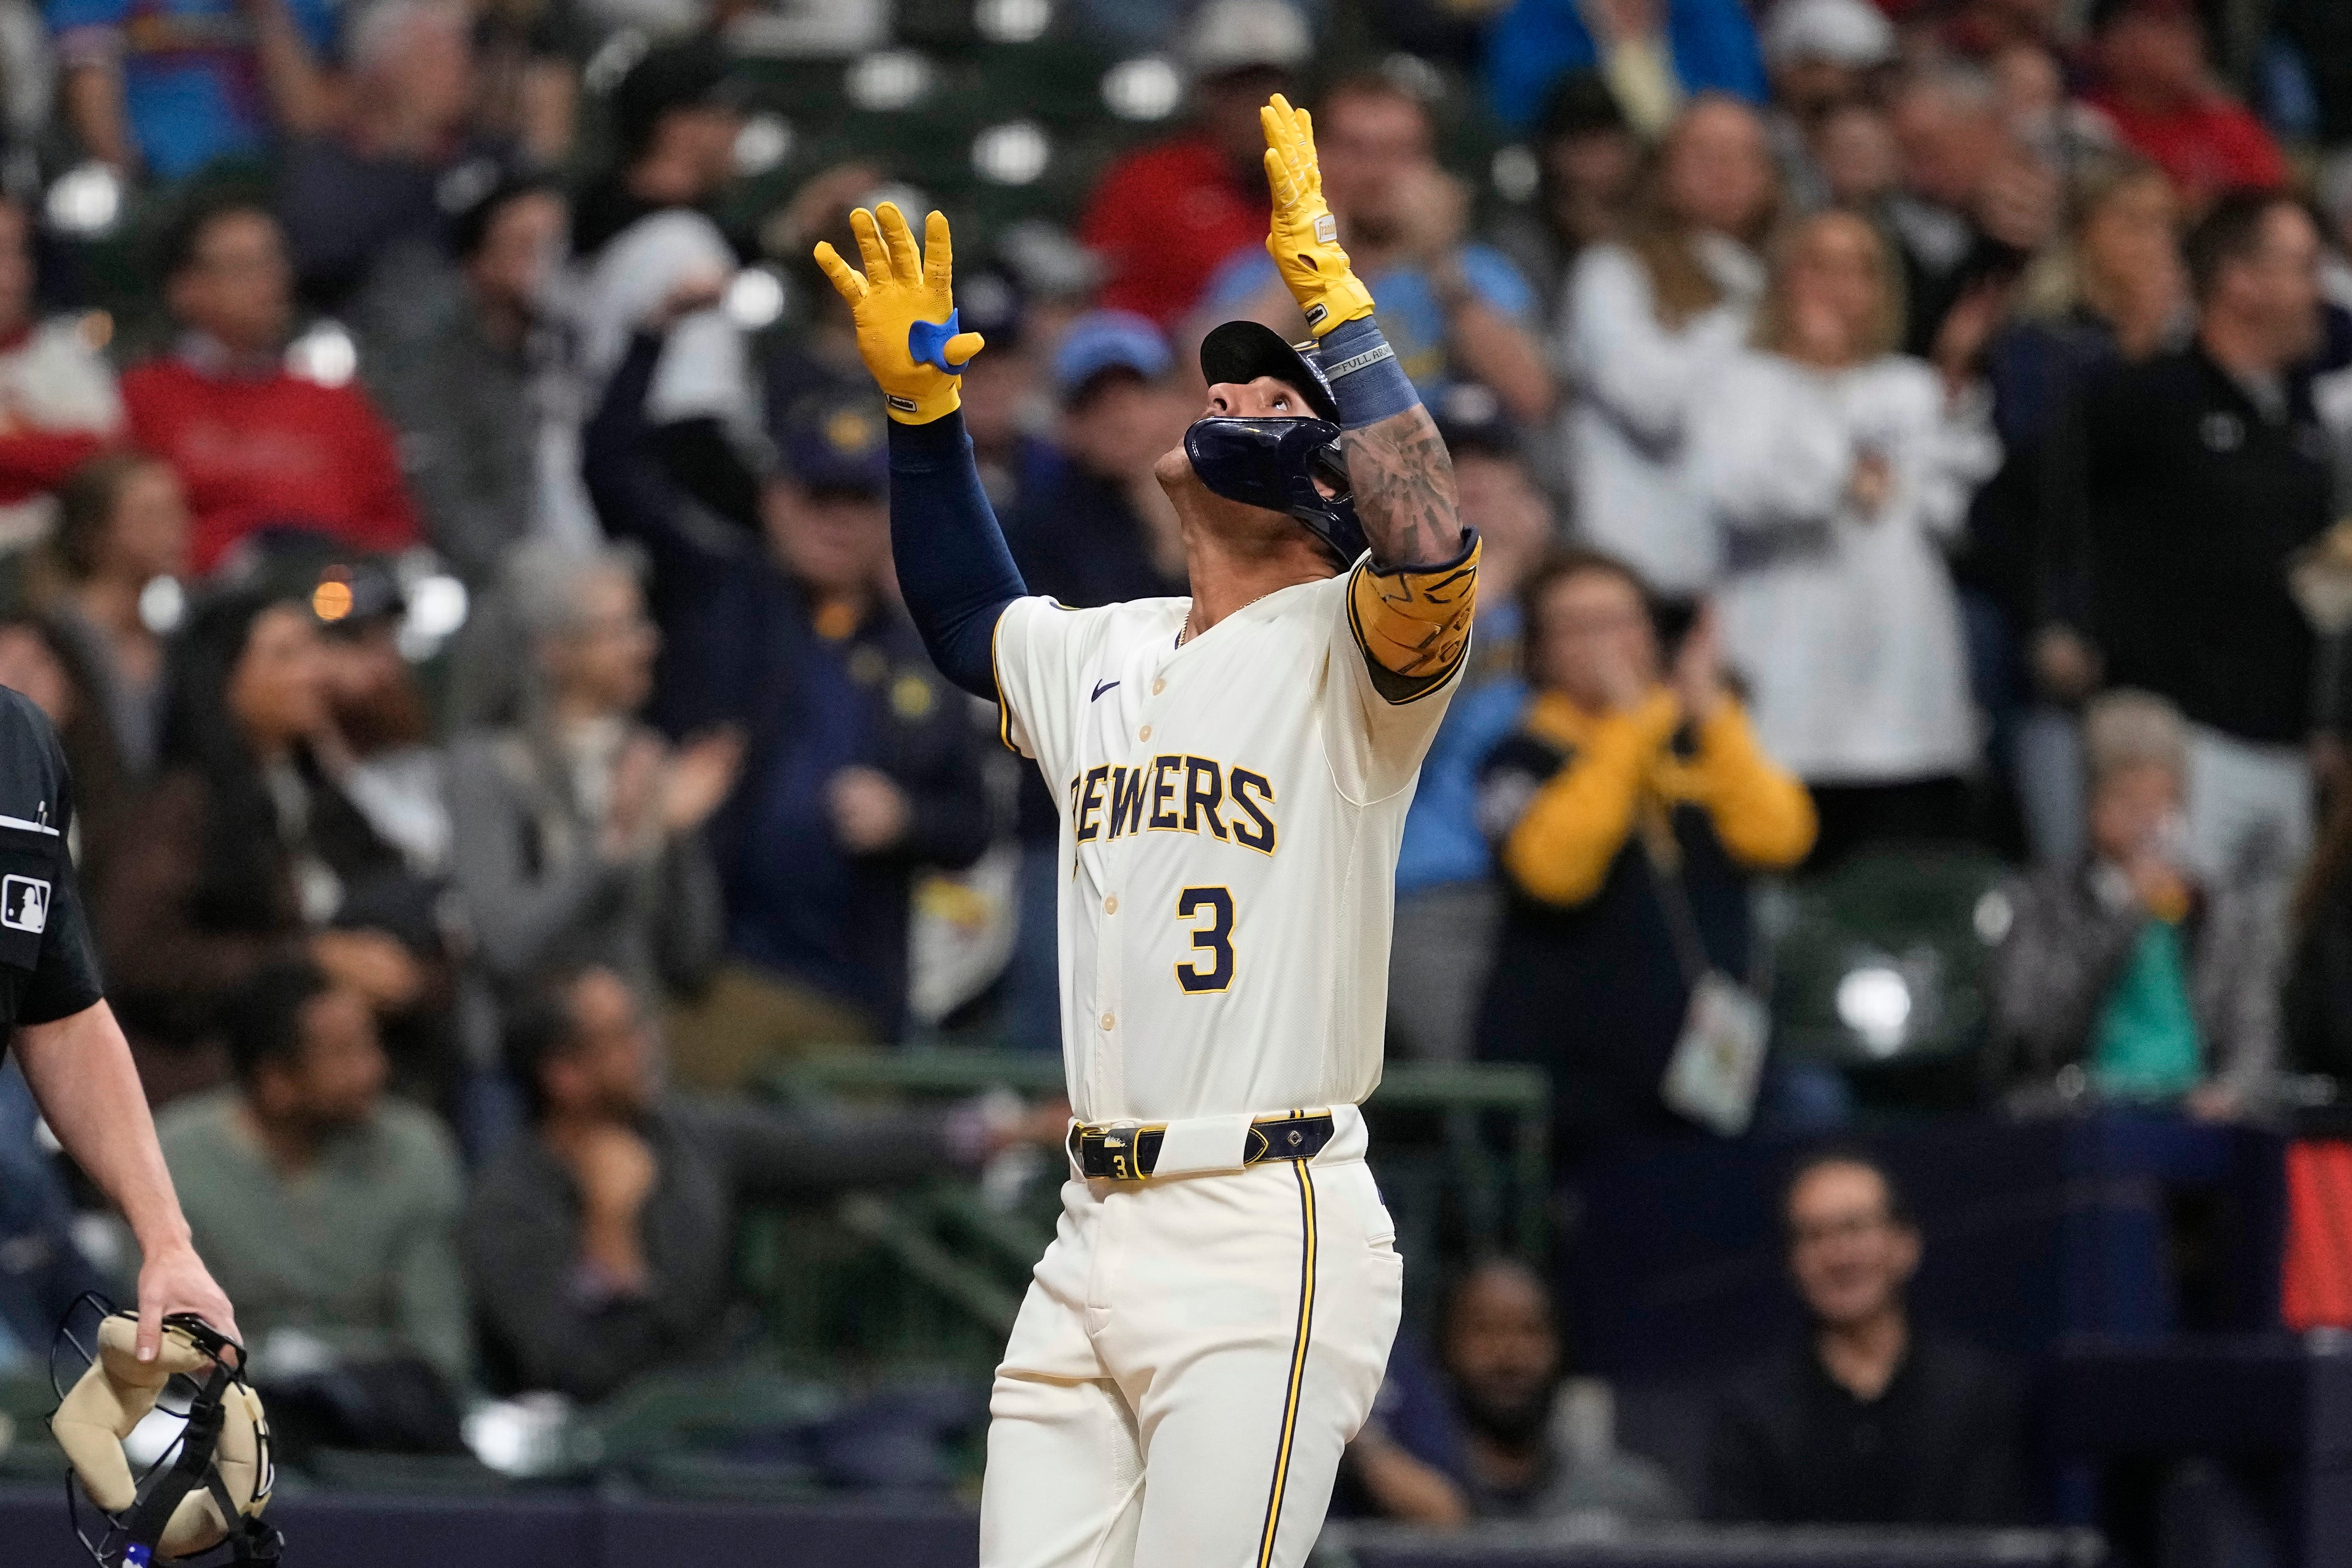 A centerpiece of the Corbin Burnes trade, Joey Ortiz looks like the real deal for the Brewers